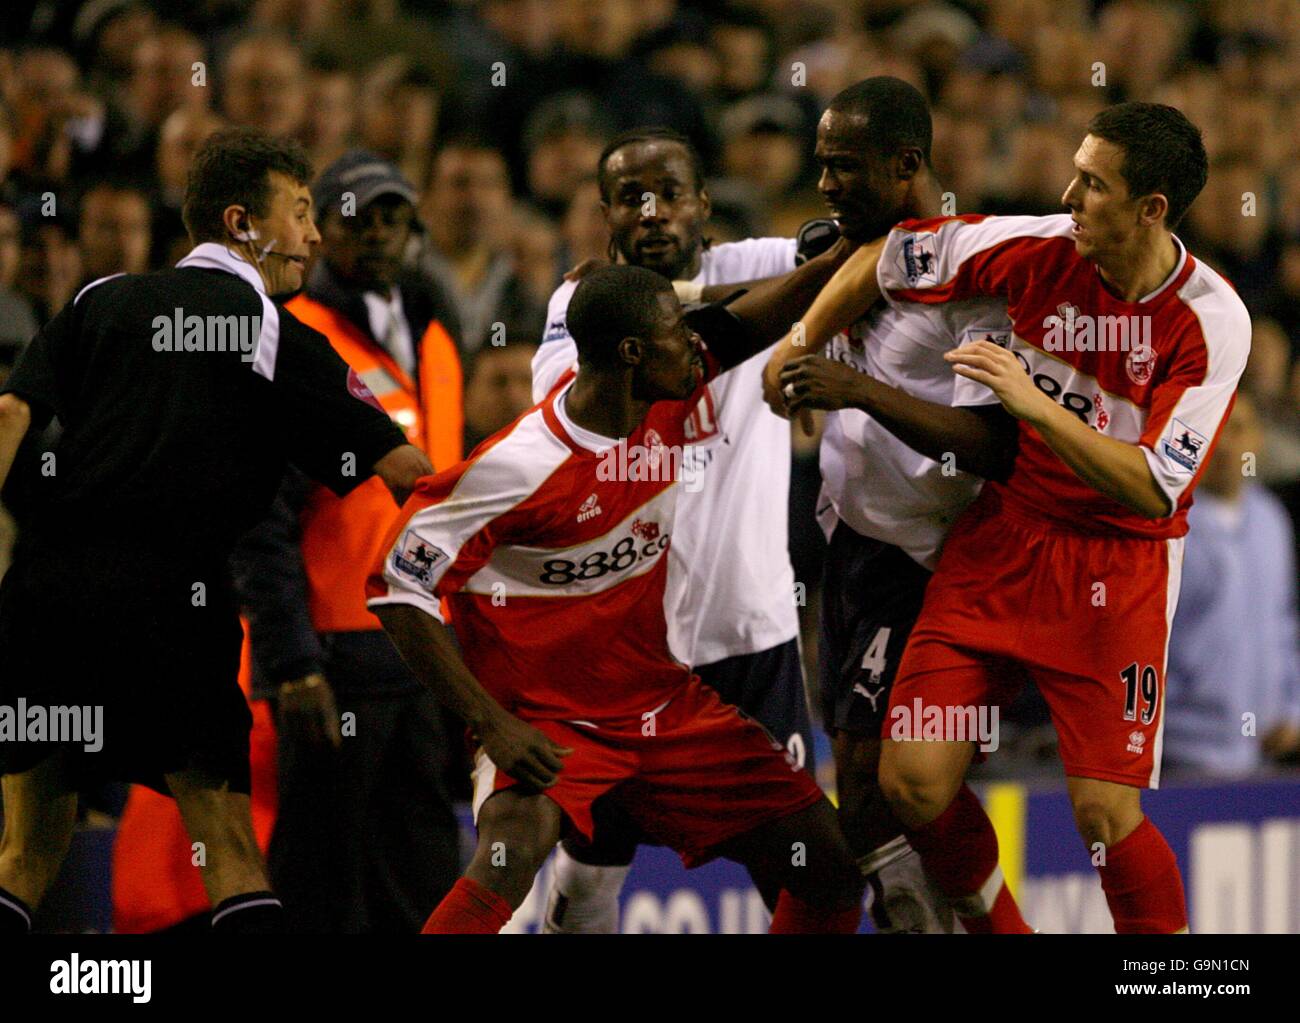 Middlesbrough's George Boateng and Tottenham Hotspur's Didier Zokora confront each other. Both were dissmissed for violent conduct Stock Photo